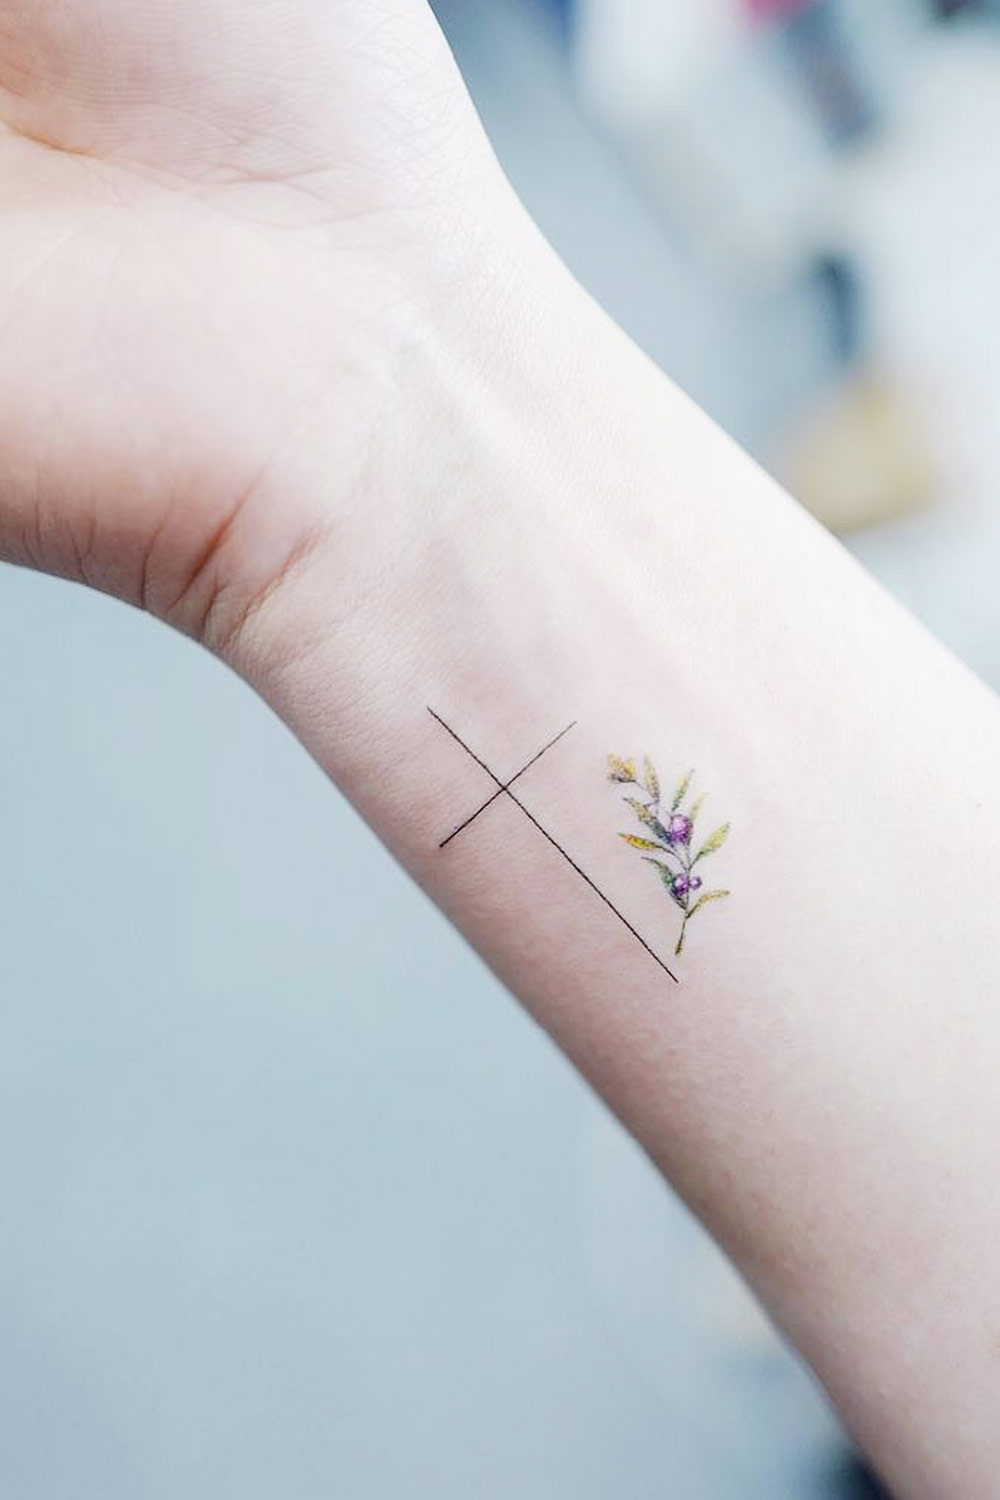 Cross Tattoo with Rosemary Leaves